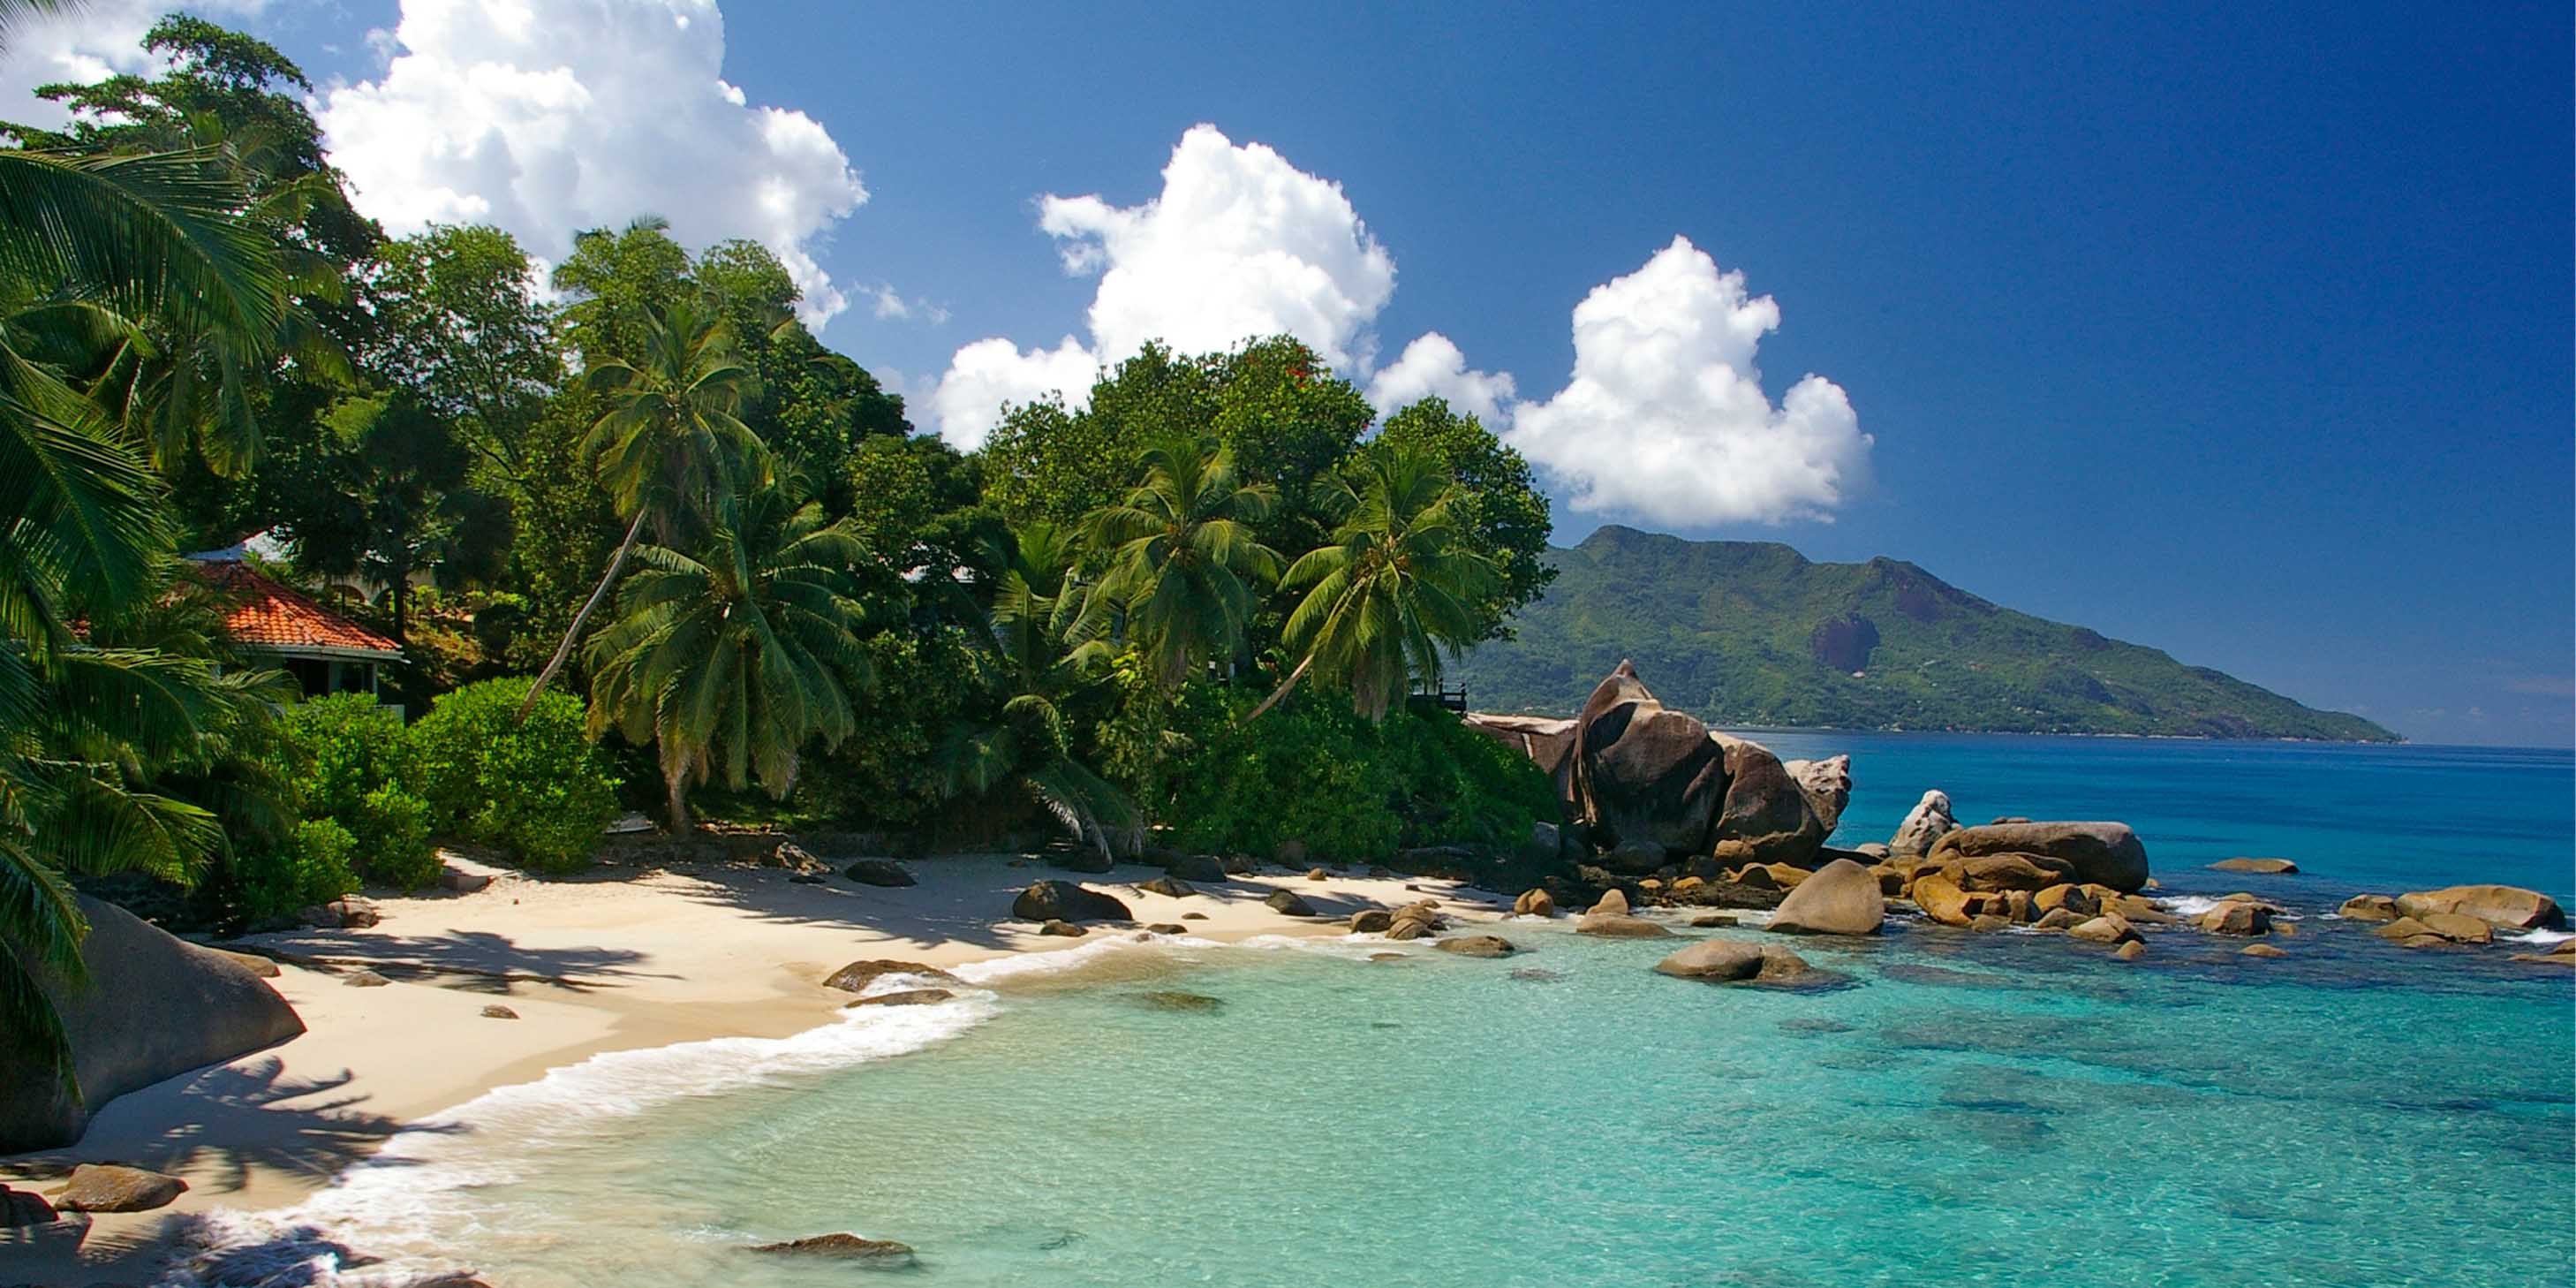 lush green foliage lining a white sandy beach with rocks scattered in the water, turquoise clear blue water and  a mountainous terrain in the background